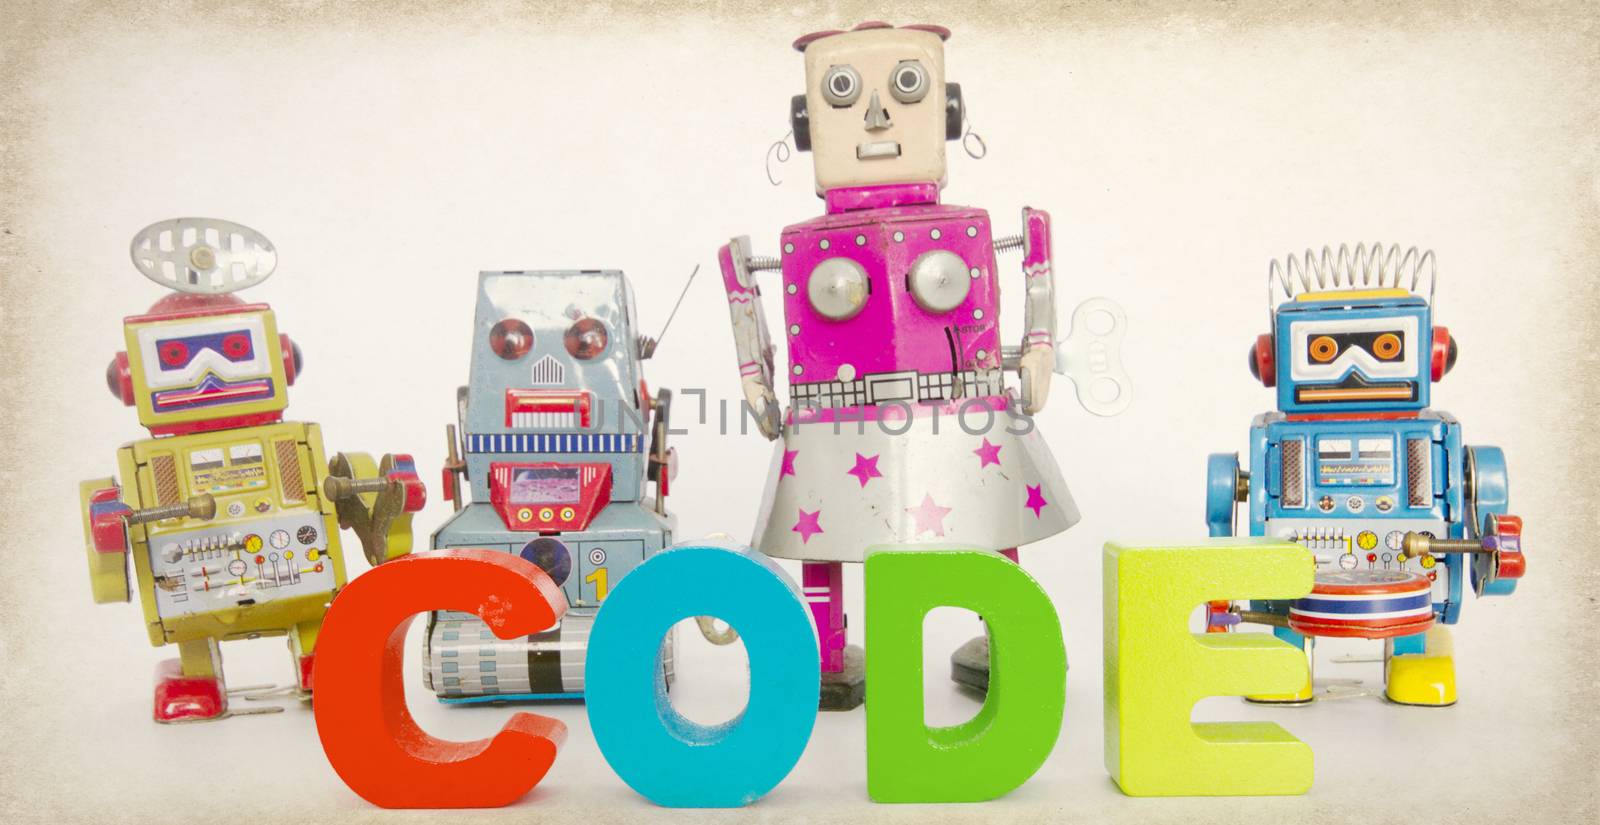 robots and the word CODE